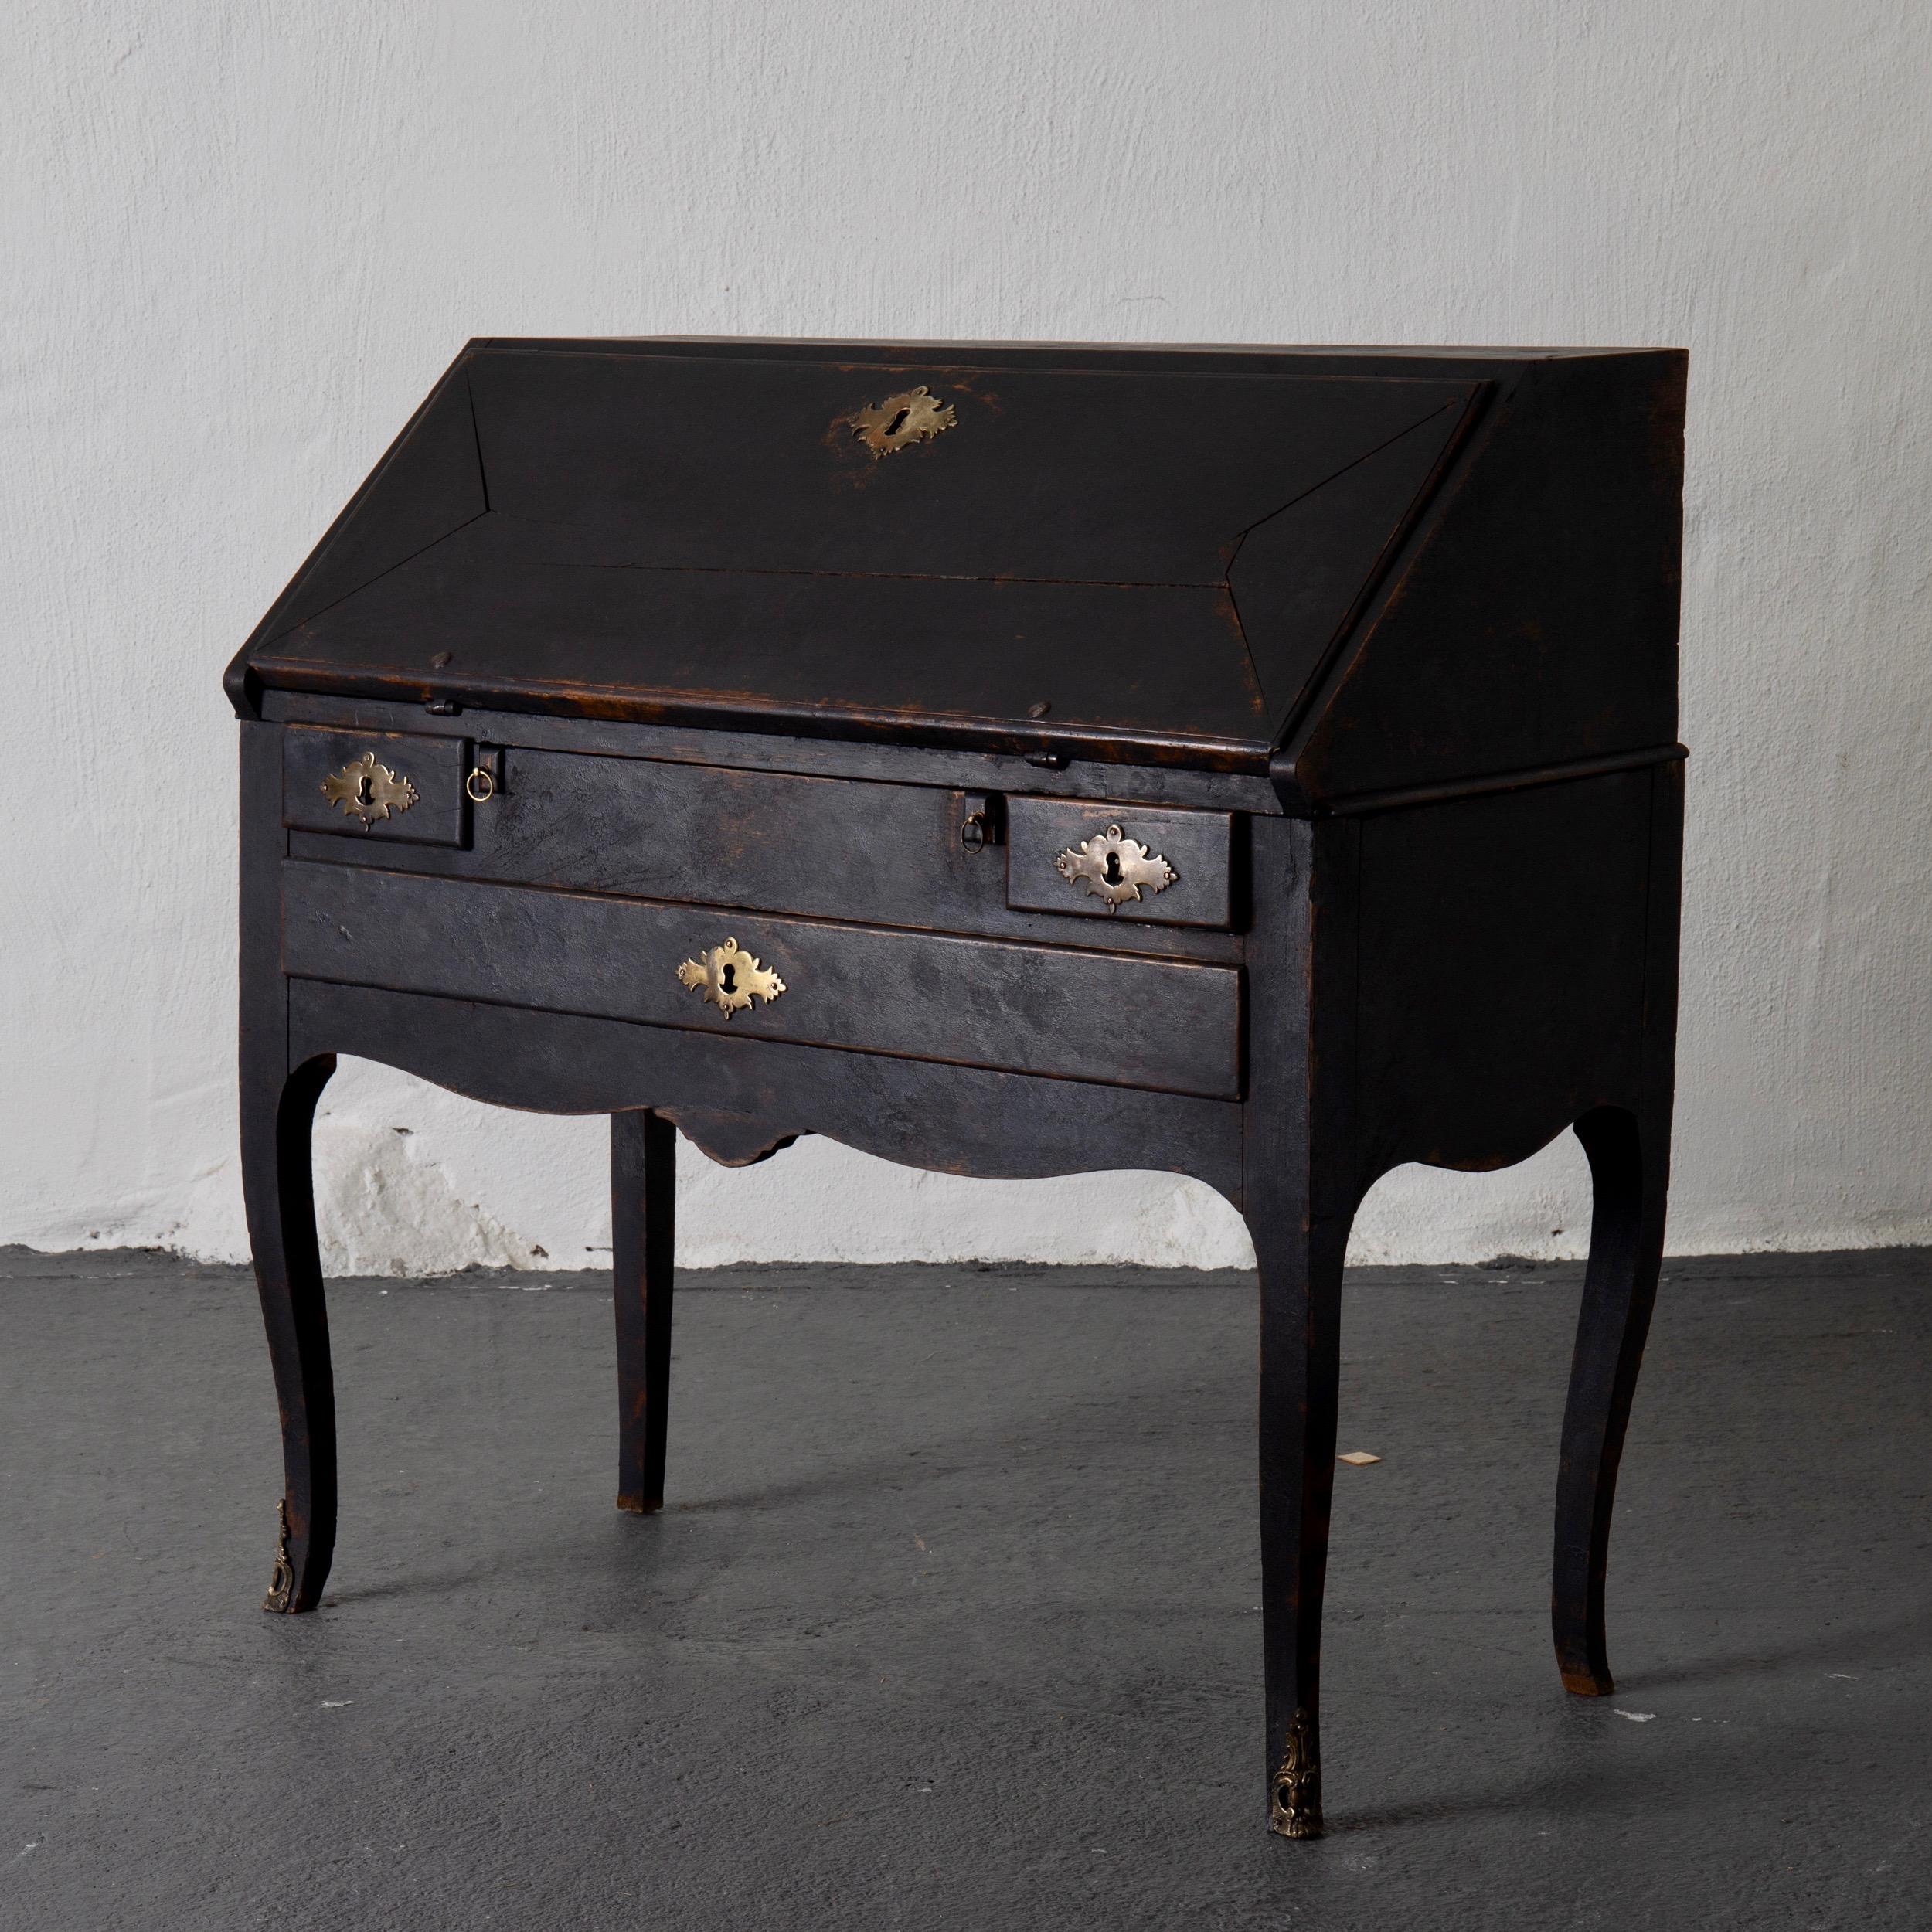 A secretary made during the Rococo period in Sweden, 1750-1775. Painted in our Laserow Black. Beautiful brass hardware and casters. Interior with compartments and drawers. 

 